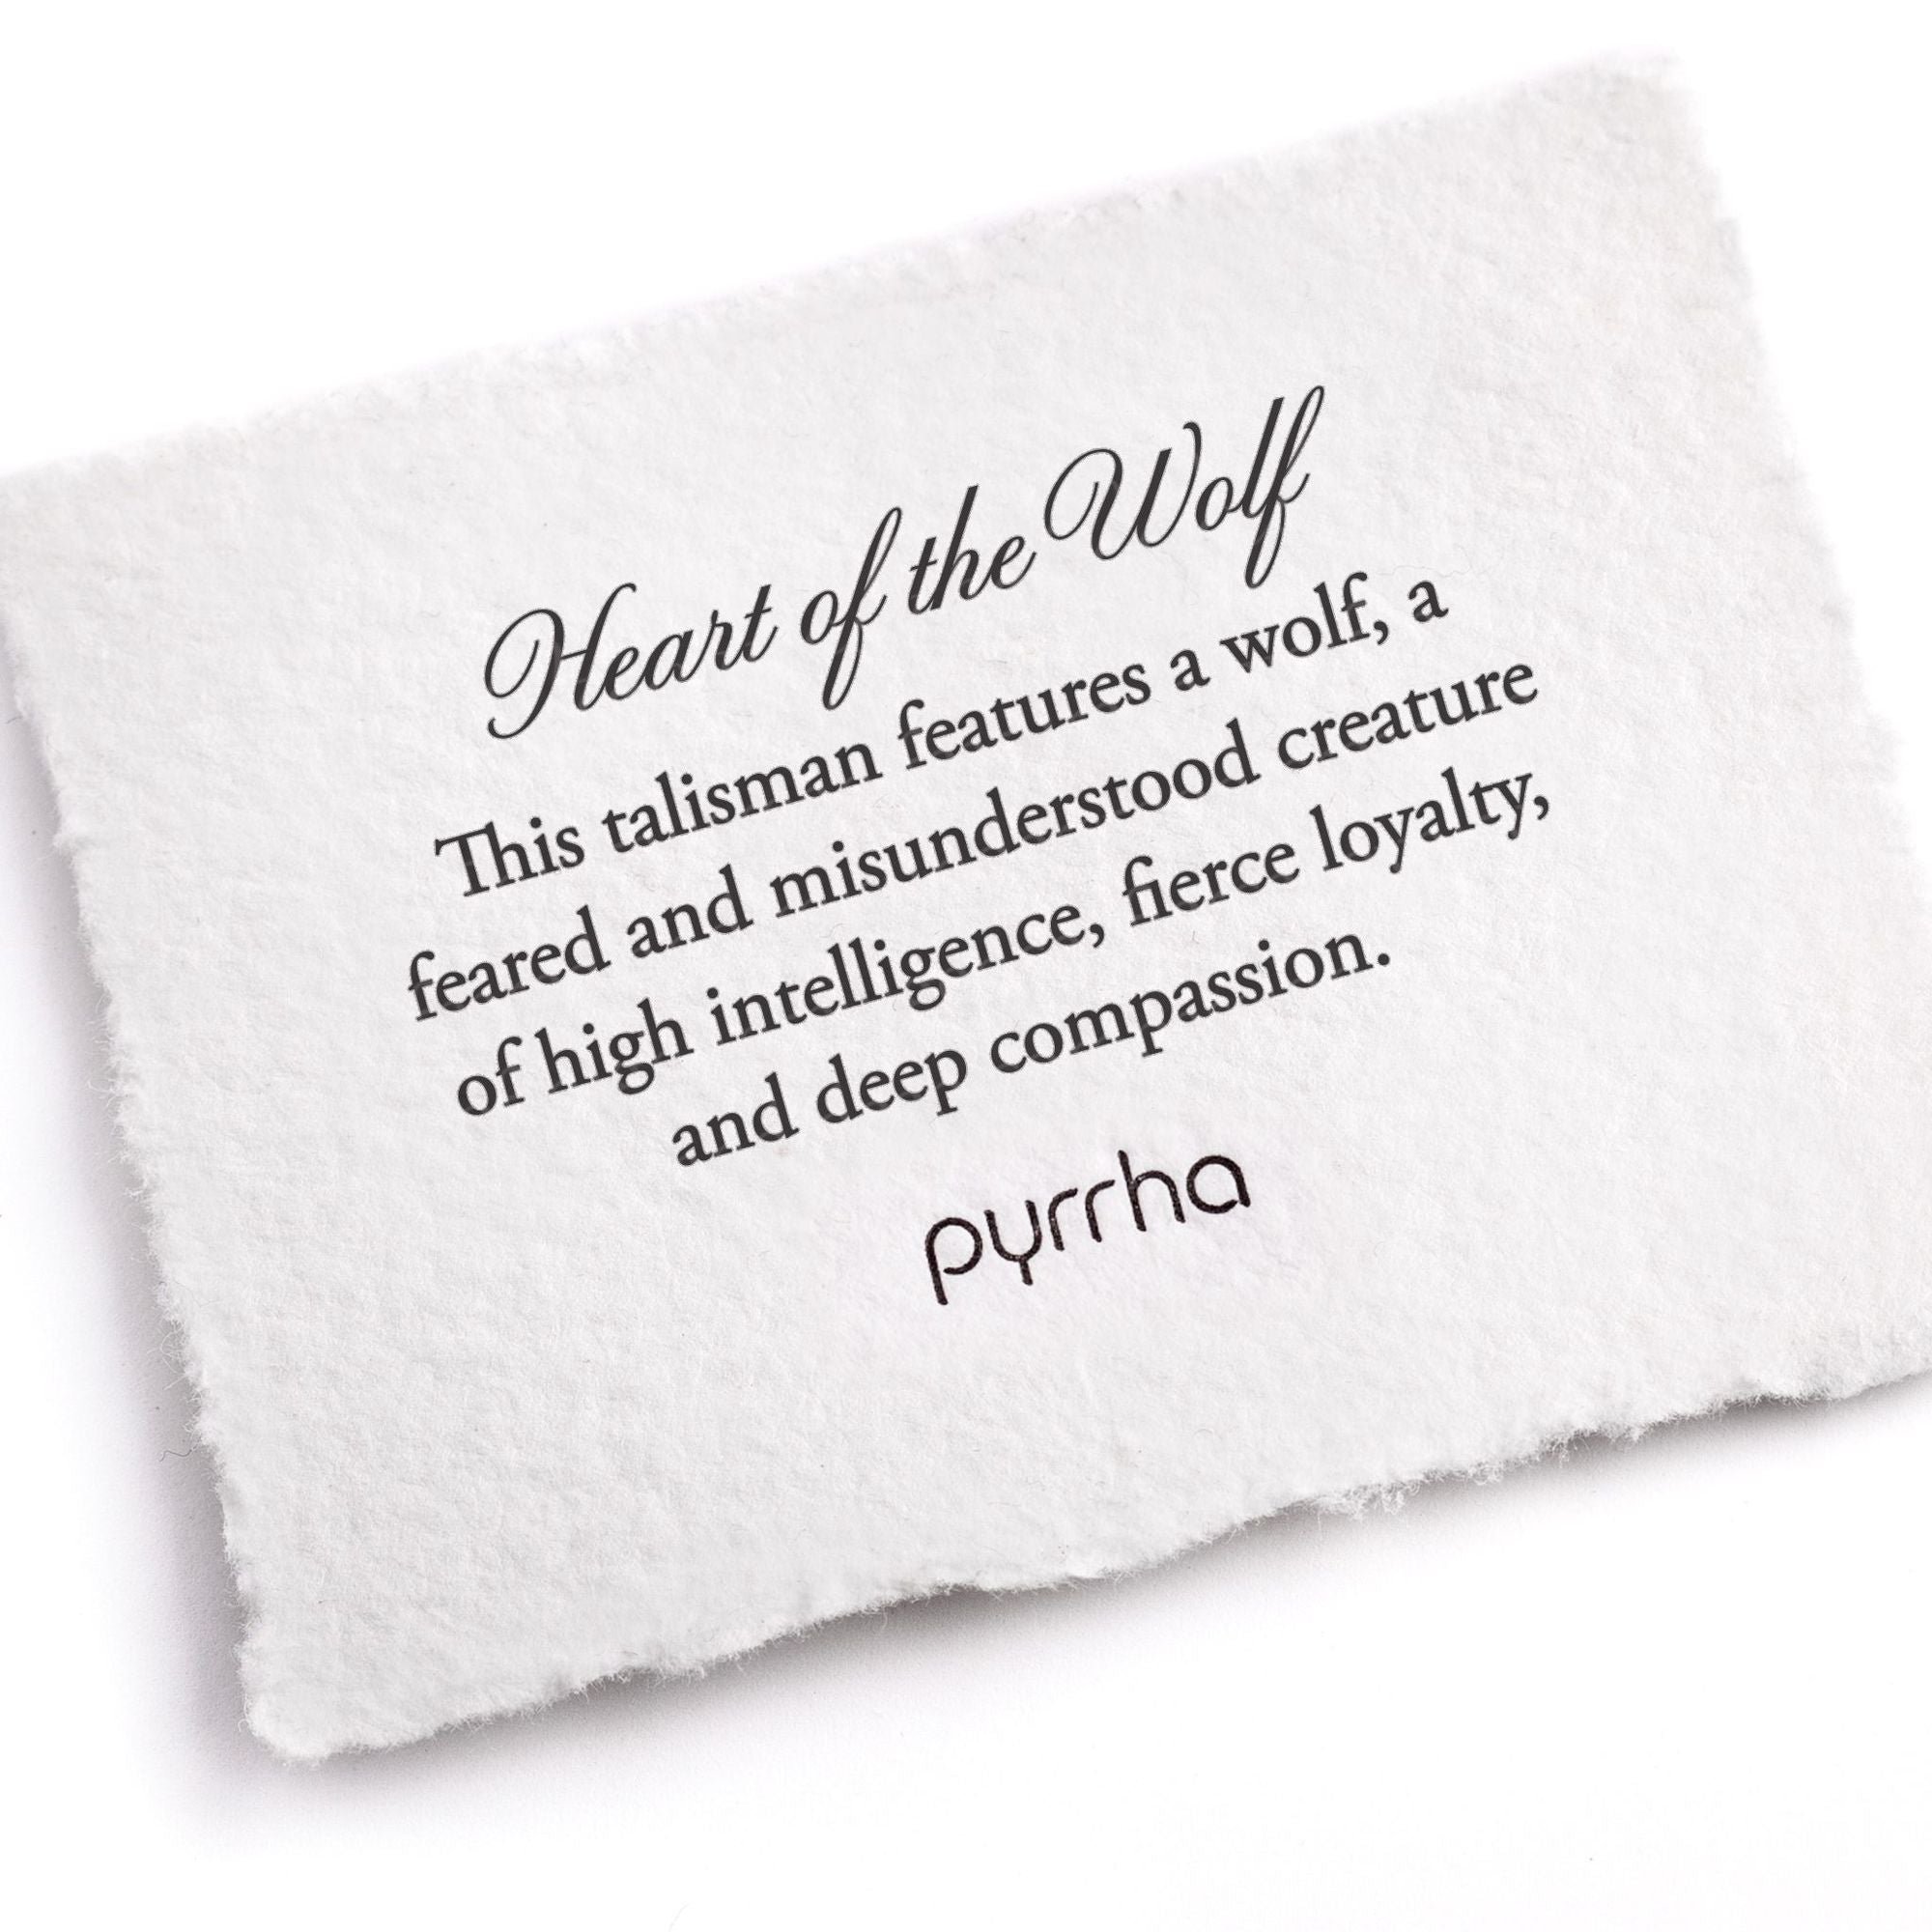 A hand-torn, letterpress printed card describing the meaning for Pyrrha's Heart of the Wolf Talisman Necklace